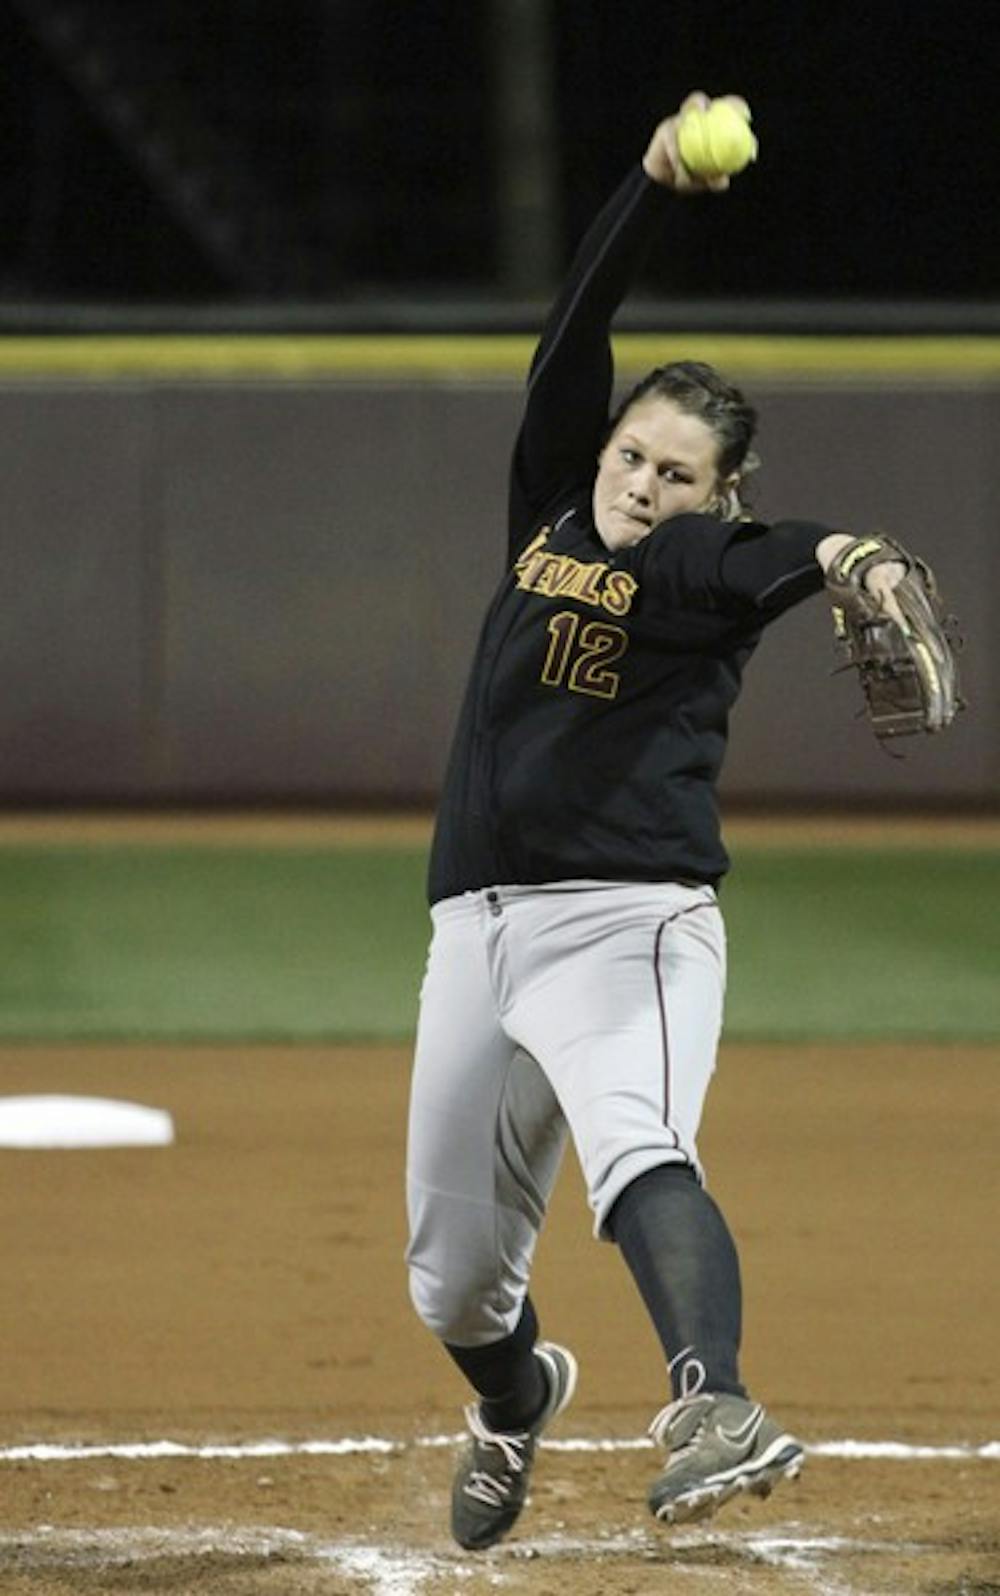 Dallas Escobedo pitches in the Littlewood Classic on Feb. 17. Escobedo threw her first no-hitter of the season during the Sun Devils’ sweep of Central Connecticut State University last weekend. (Photo by Sam Rosenbaum)